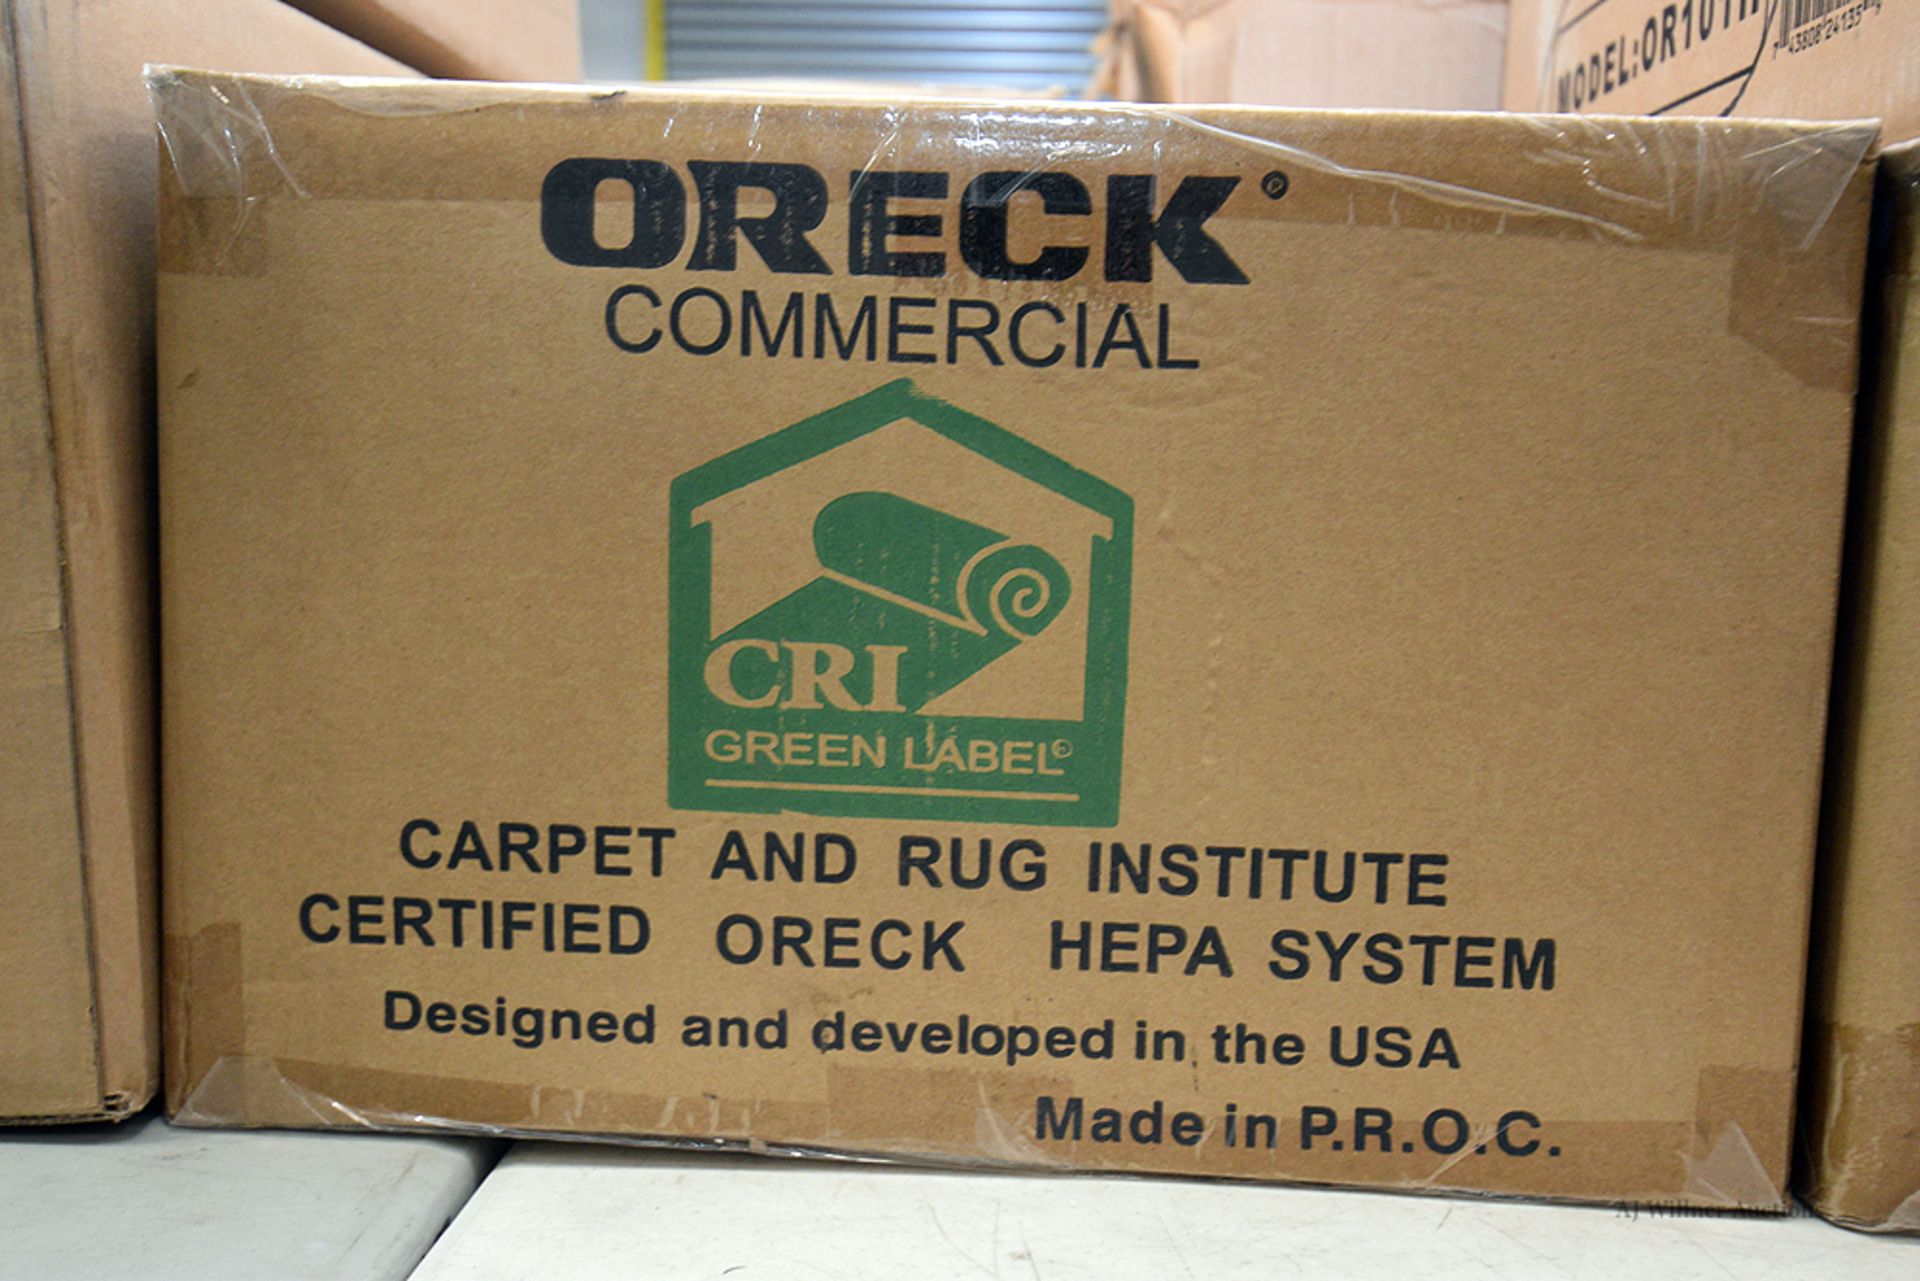 Oreck, "Commercial Upright" HEPA System, Model OR101H